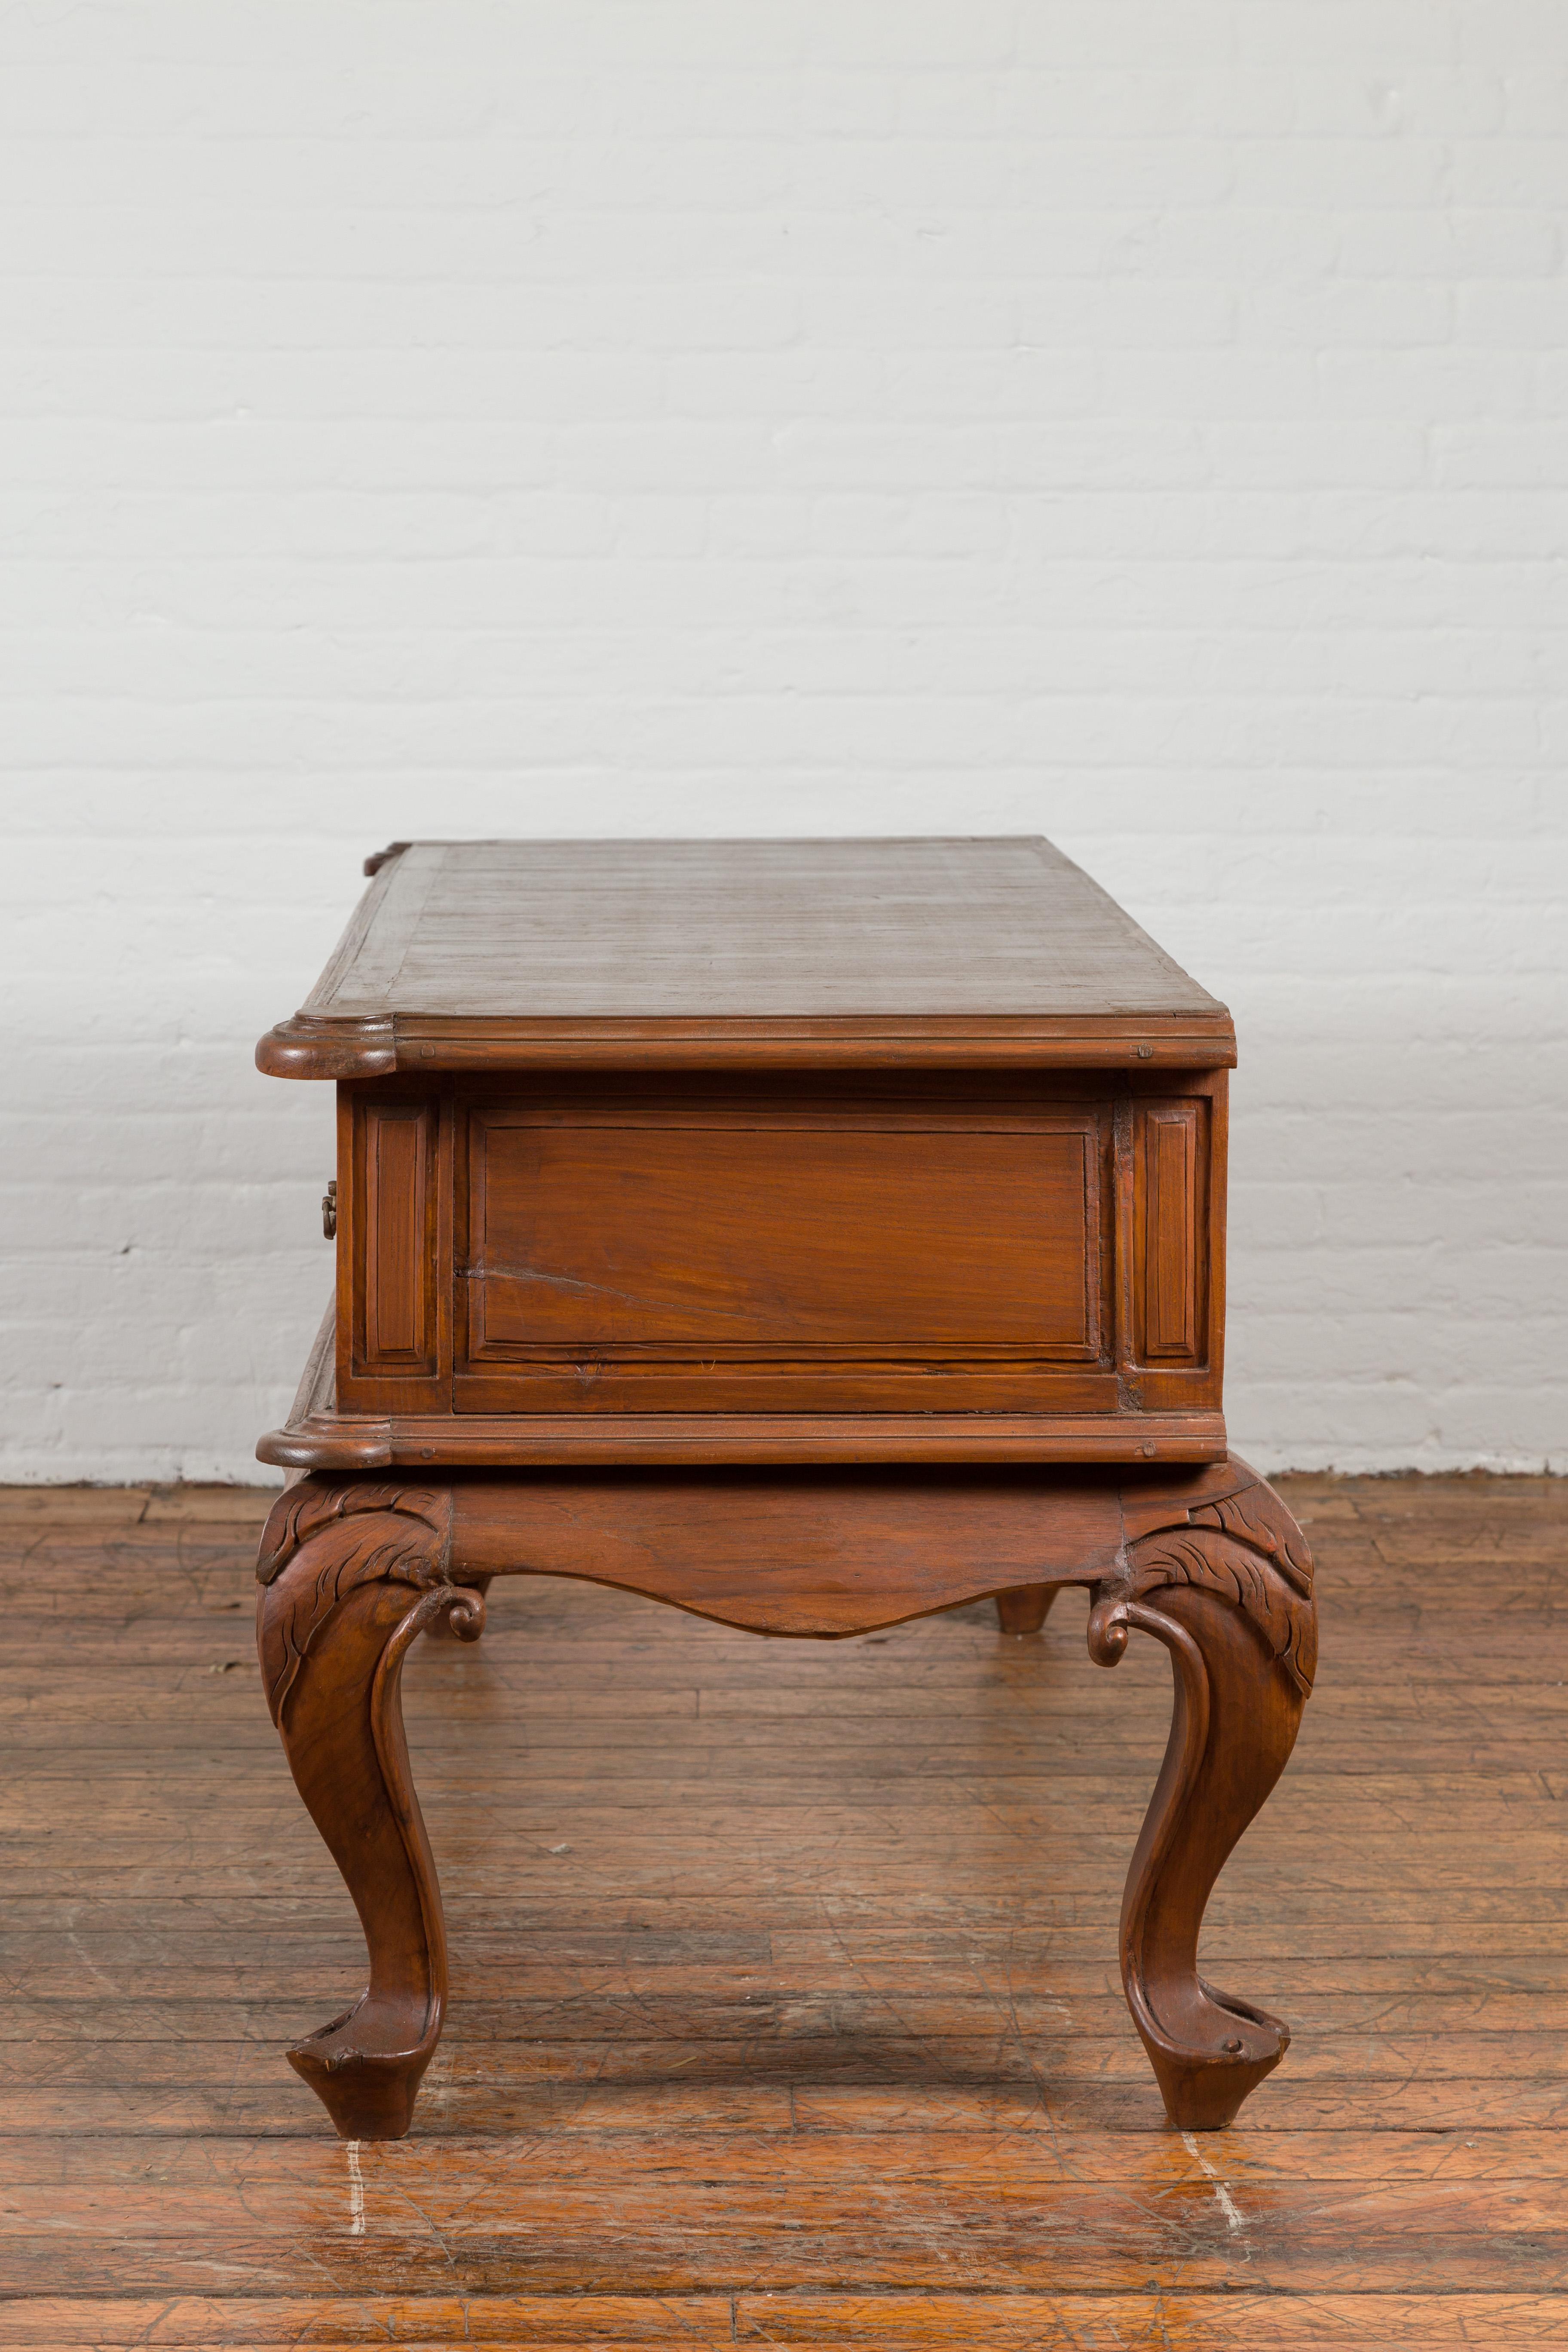 Dutch Colonial Early 20th Century Low Table with Two Drawers and Cabriole Legs For Sale 8